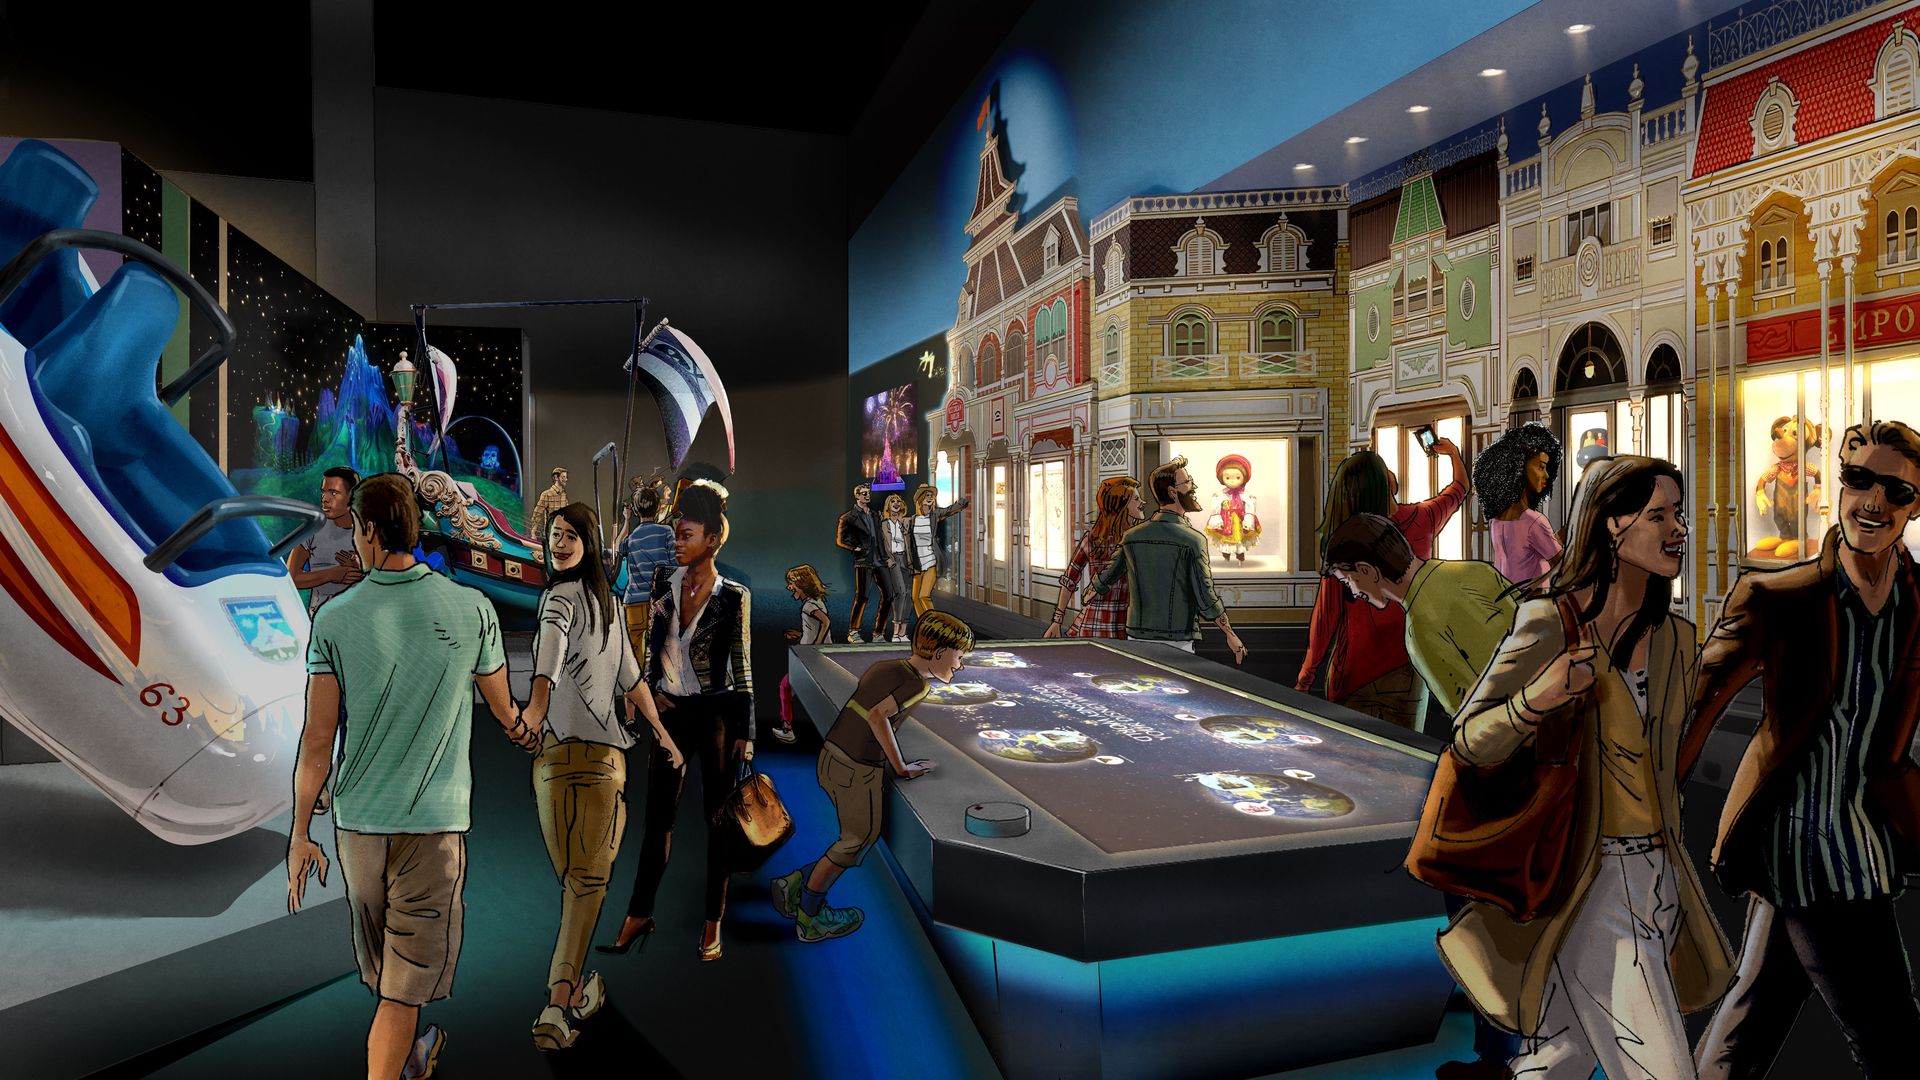 A rendering of an exhibit at the Disney100 exhibition at the Franklin Institute